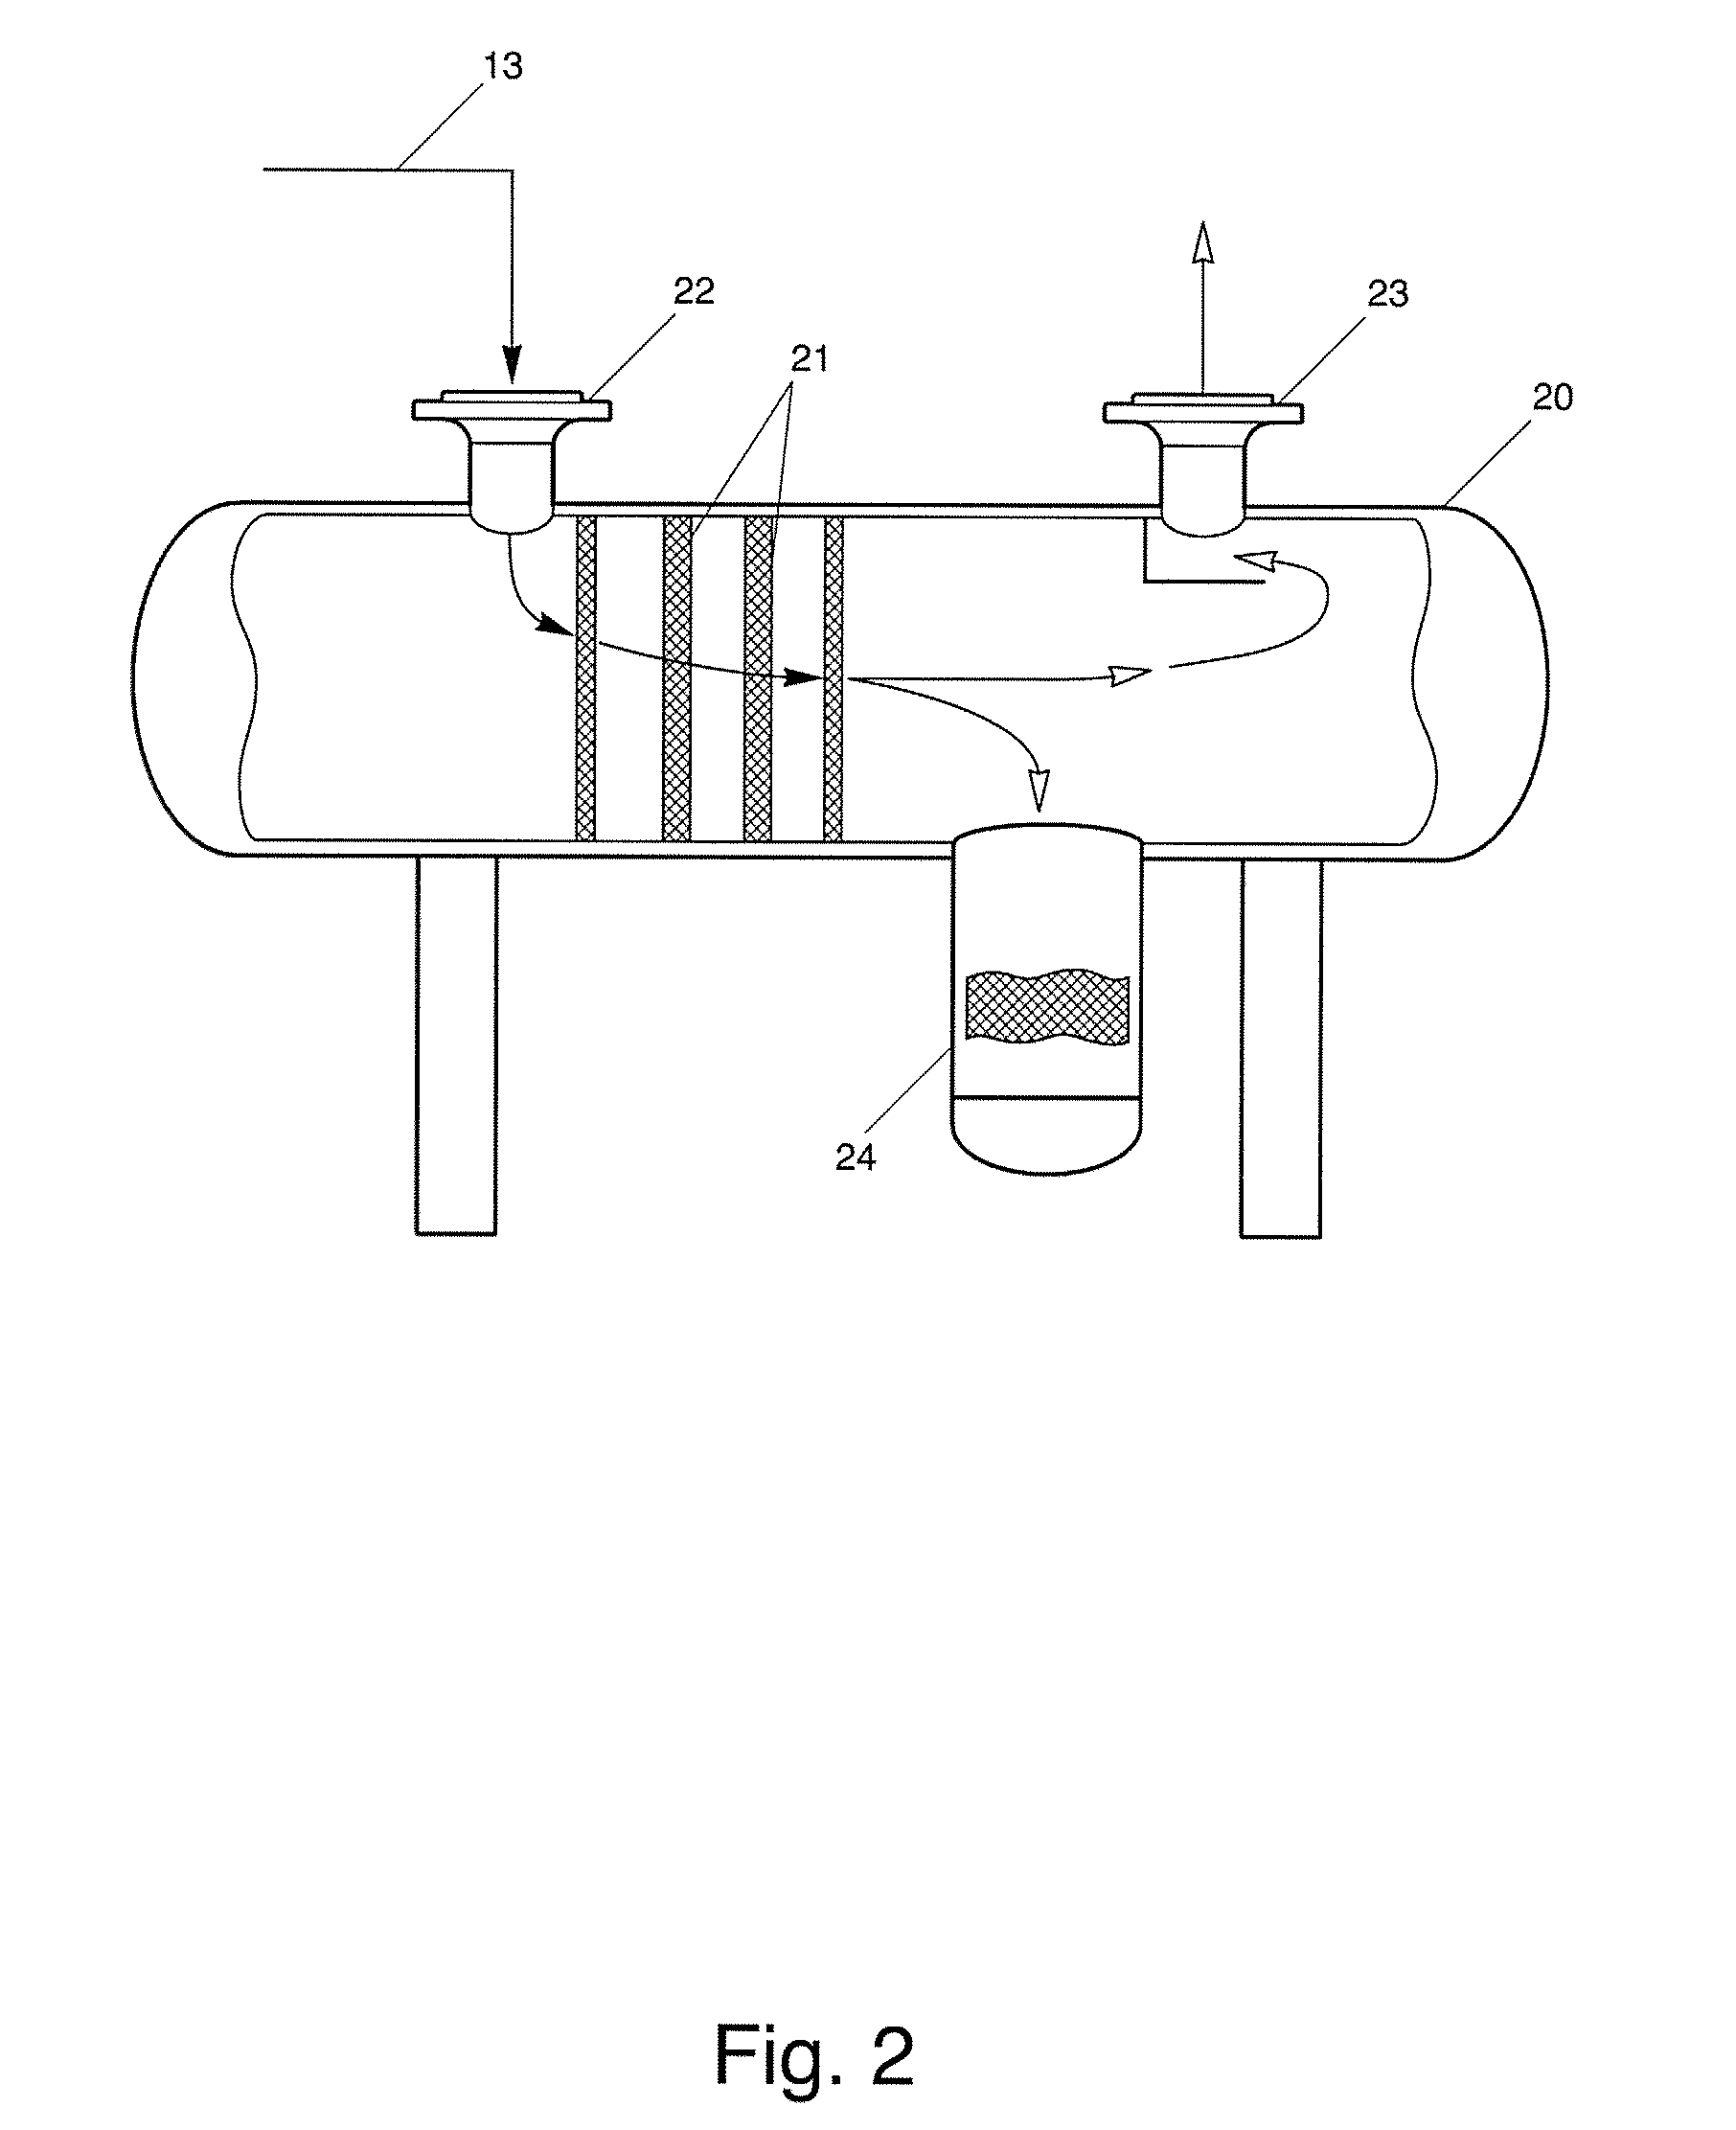 Systems and methods for removal of heavy metal contaminants from fluids